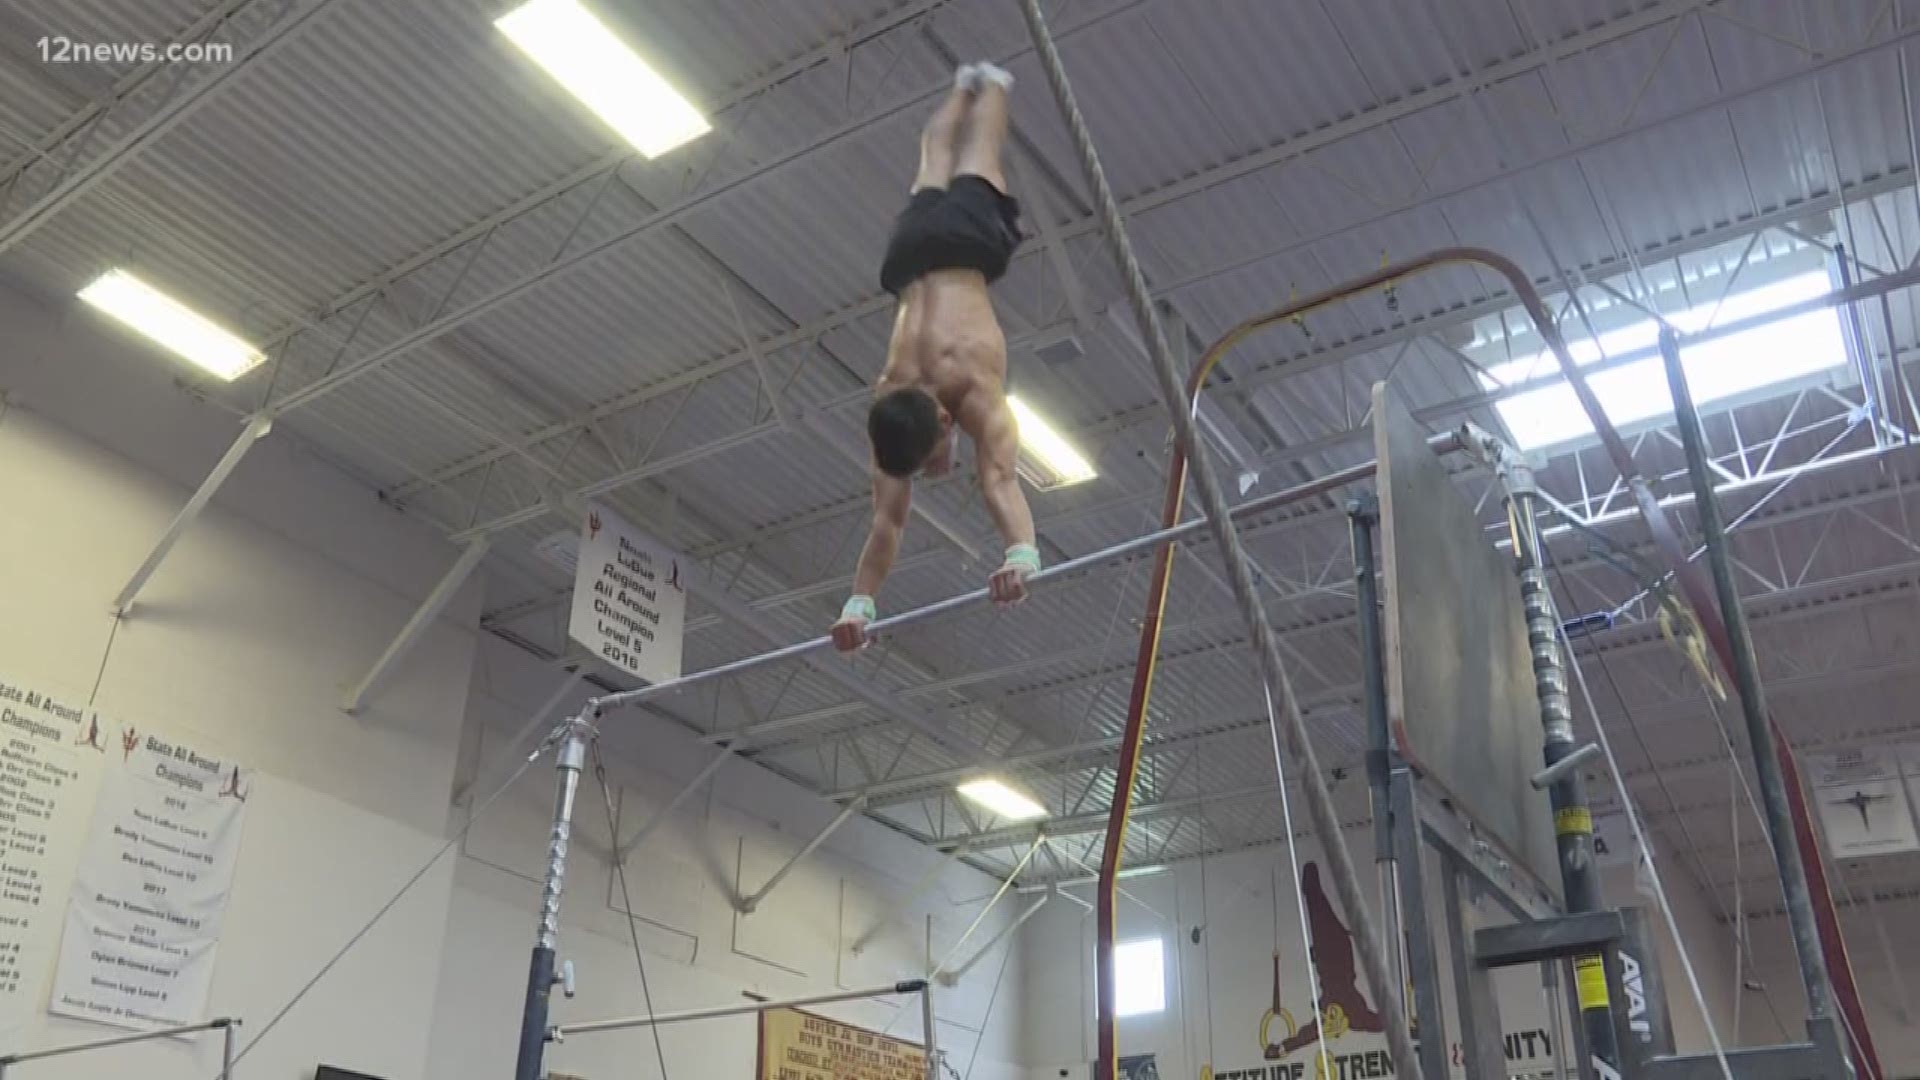 17-year-old Brandon Briones is an exceptional gymnast with his eyes on the next Olympics, and a high school senior at Gilbert High. After winning the U.S. Gymnastics Championship last month he has his hopes set on a bigger prize.